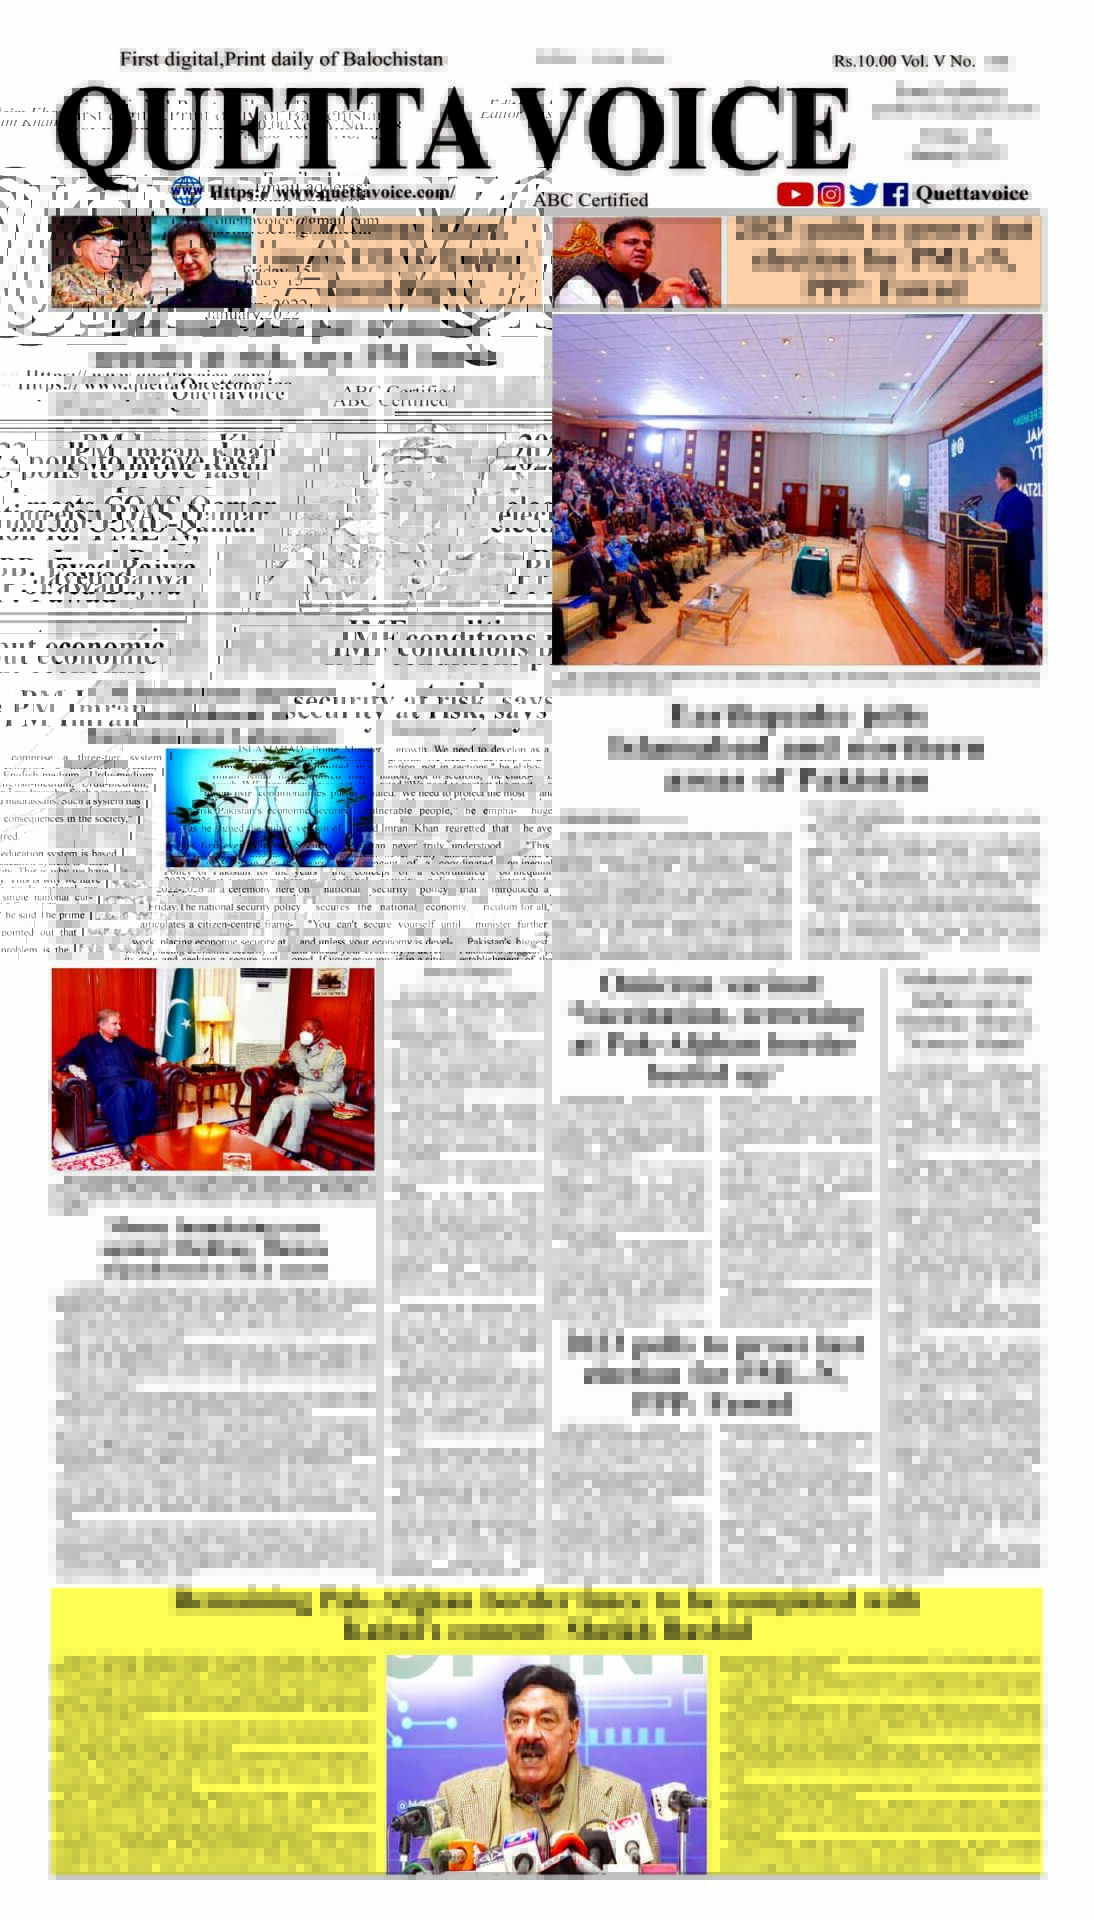 Today's Quetta Voice Newspaper, Saturday, January 15, 2022